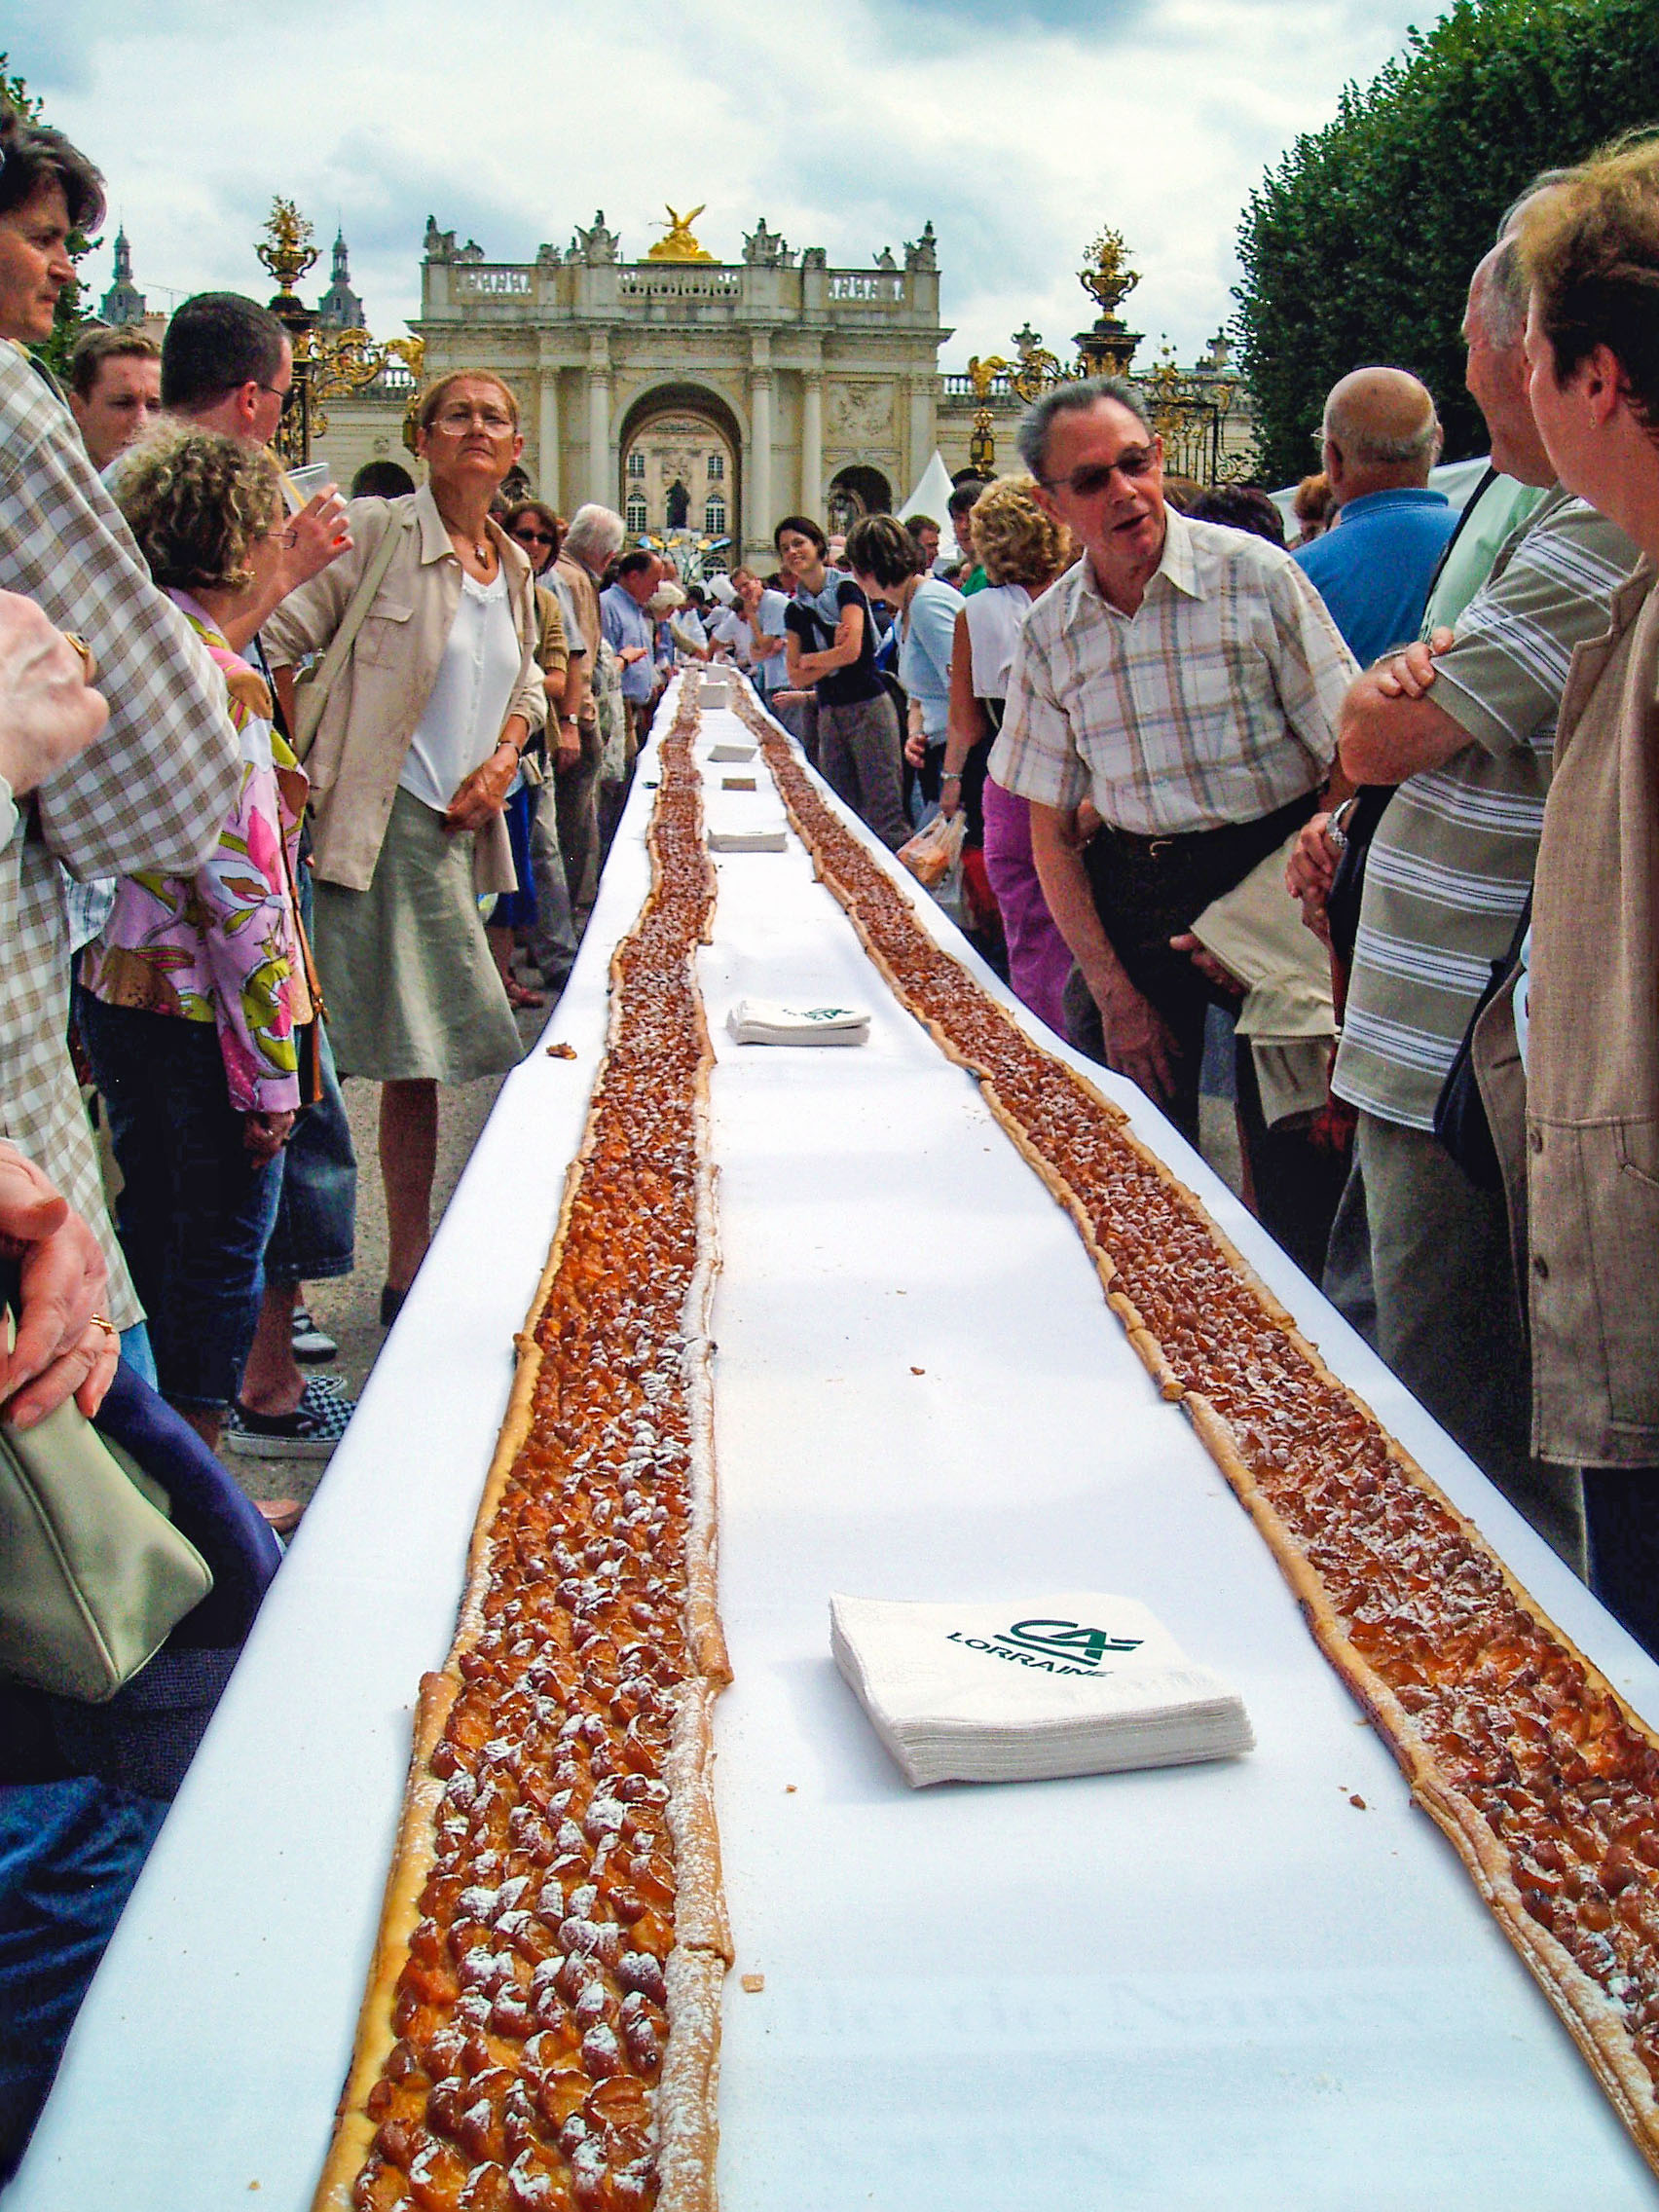 World record for the longest mirabelle plum tart in Nancy © CapnPrep - licence [CC BY-SA 2.5] from Wikimedia Commons